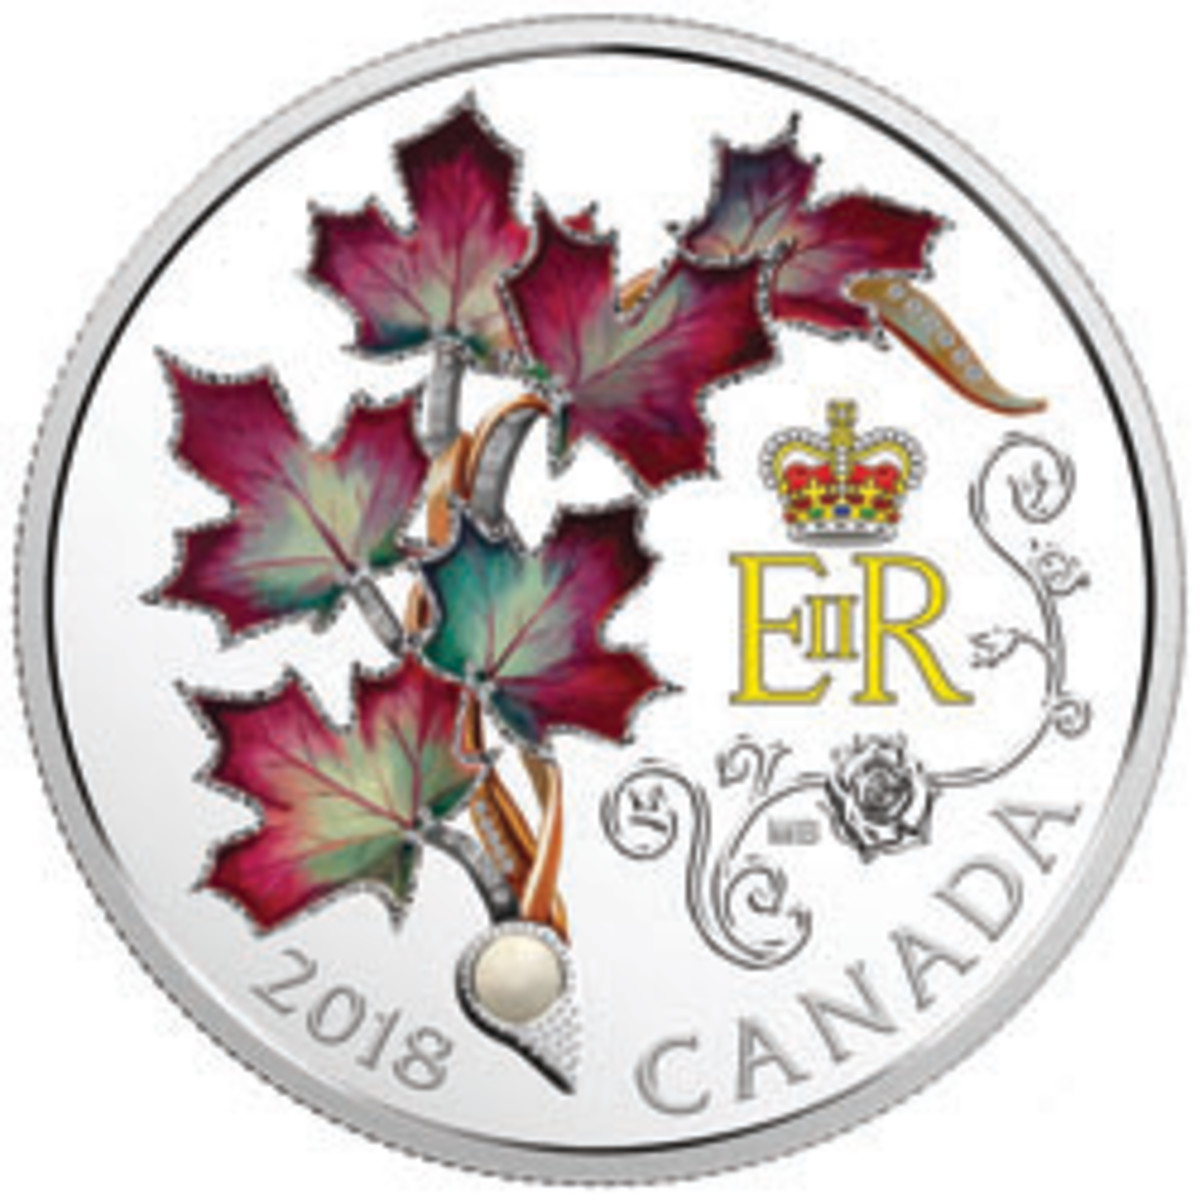  The second displays her unique 116-year-old maple leaf brooch. (Image courtesy Royal Canadian Mint)